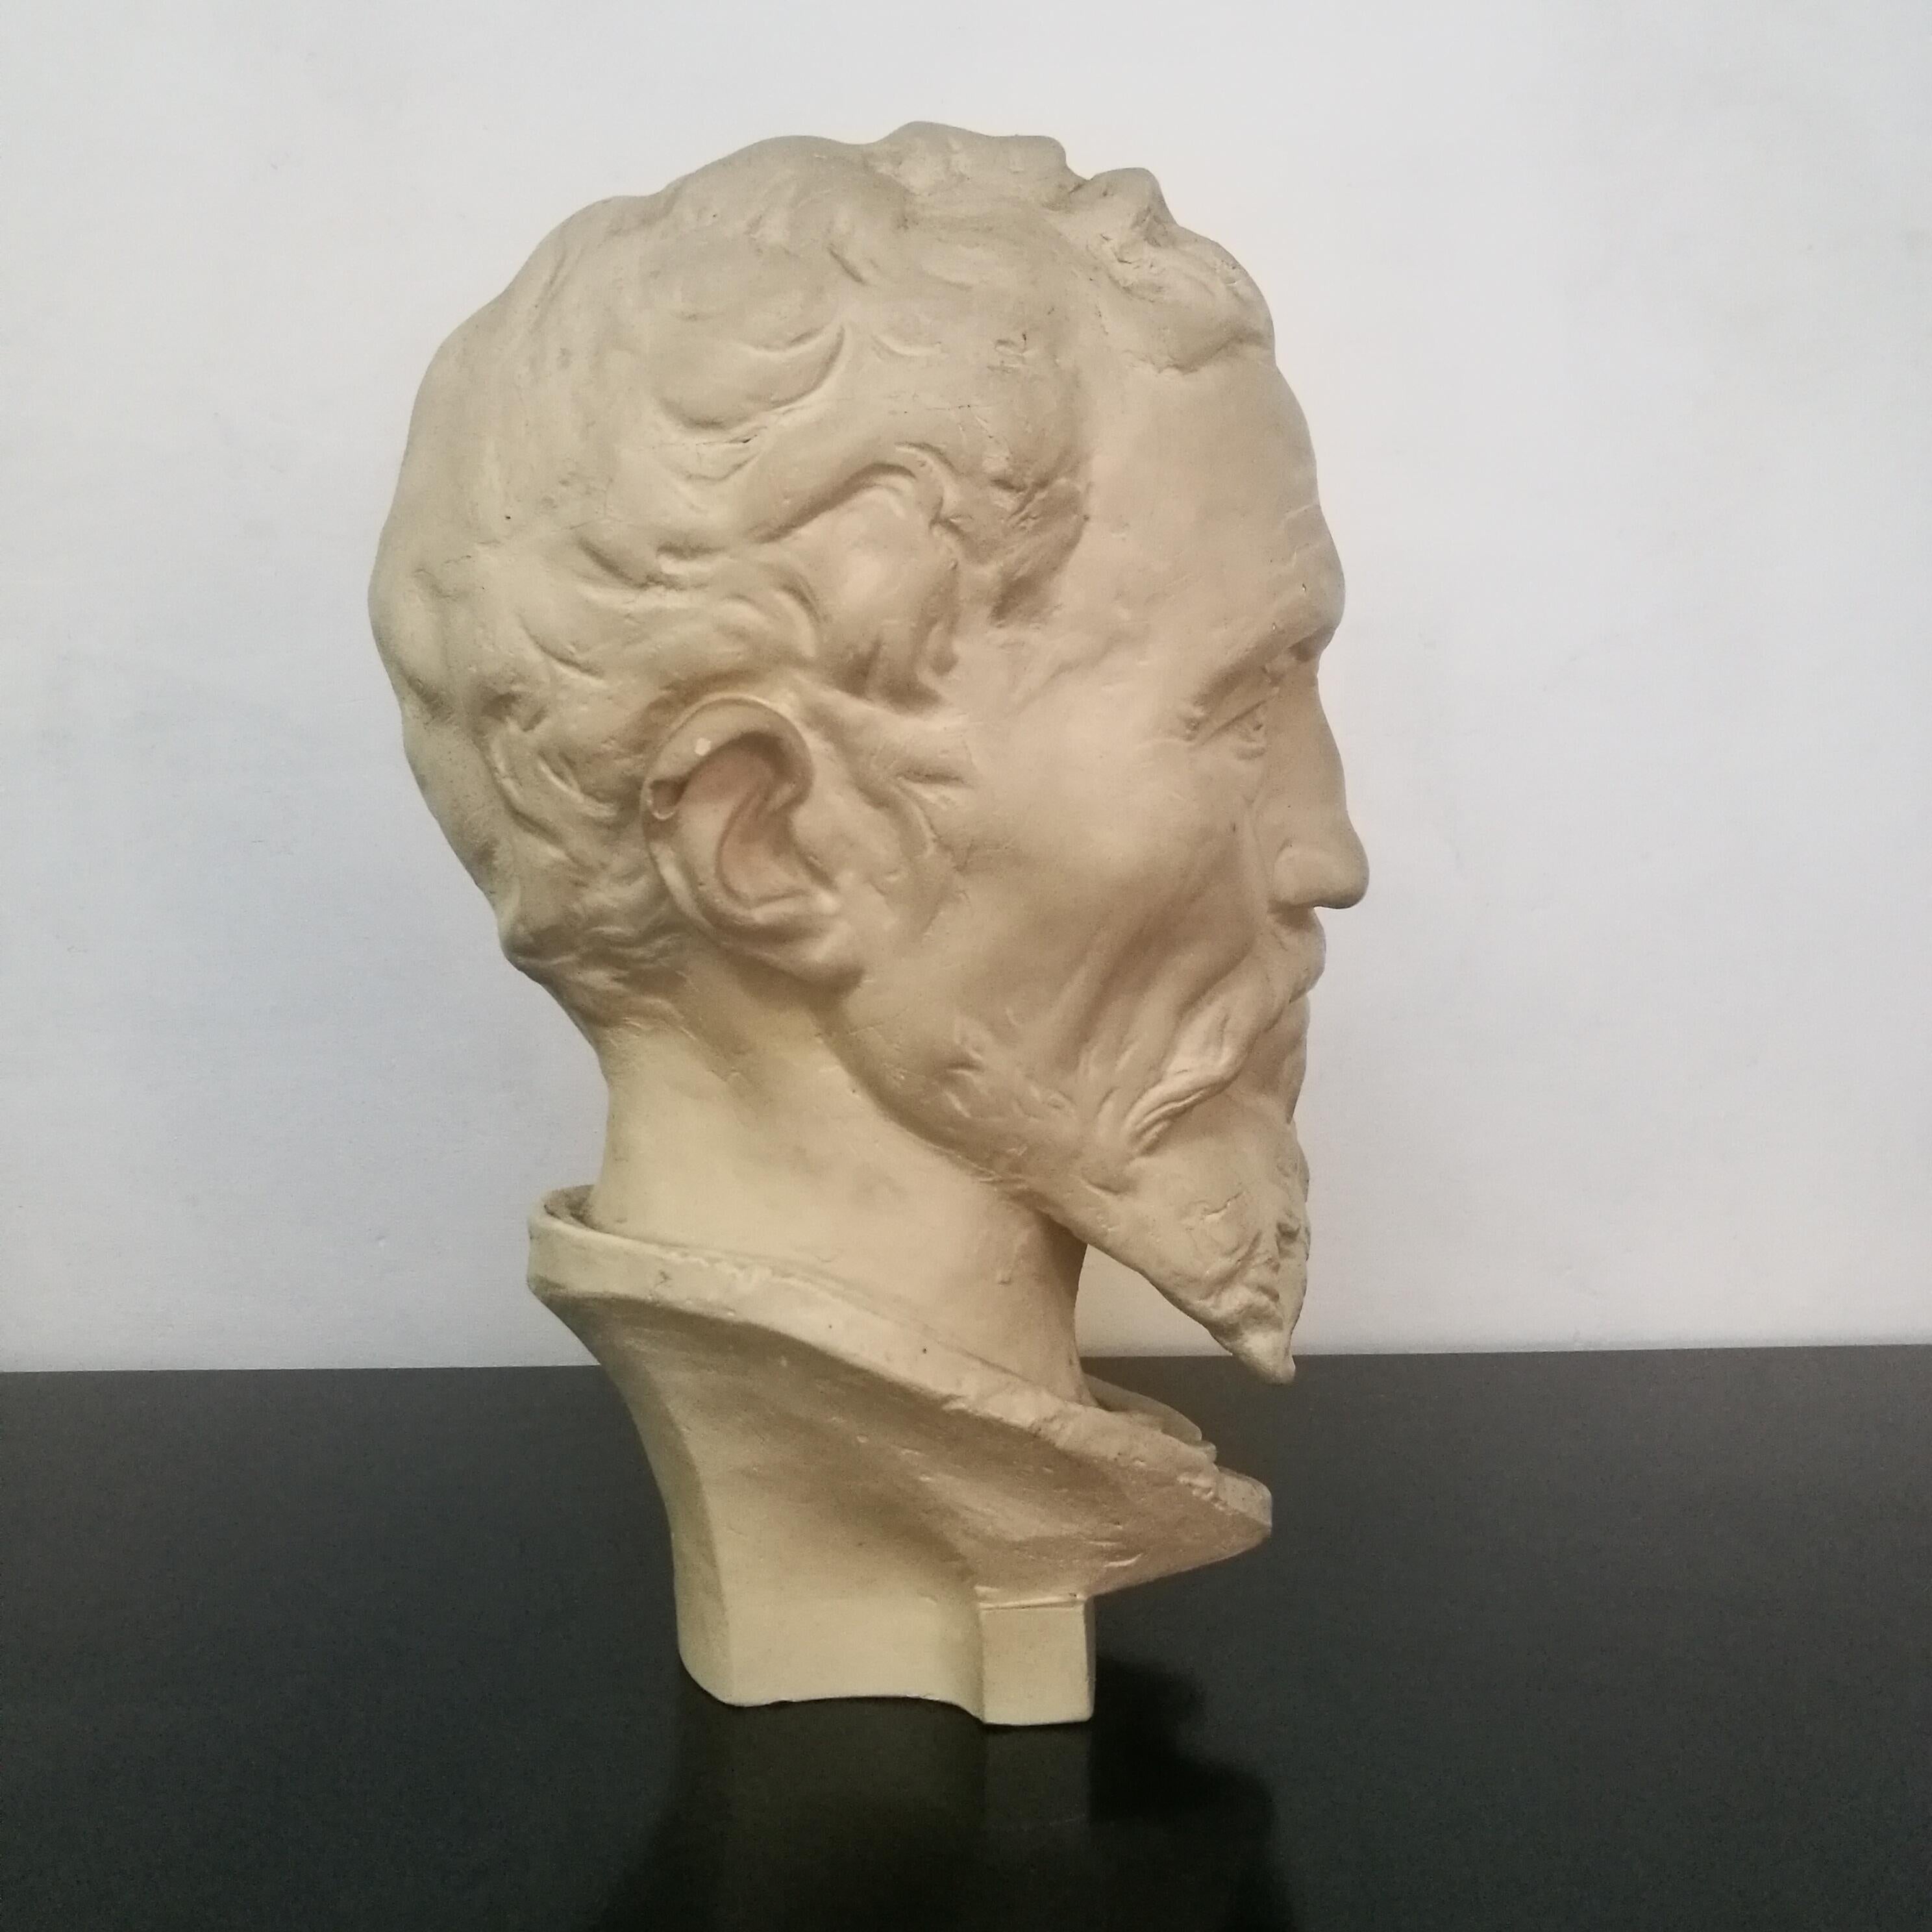 Italian plaster sculpture of Michelangelo Buonarroti, 1970s
Plaster sculpture of Michelangelo Buonarroti, whose face is very faithfully represented and with a rather sad expression.
The sculpture was made by an artist based in Milan, in the